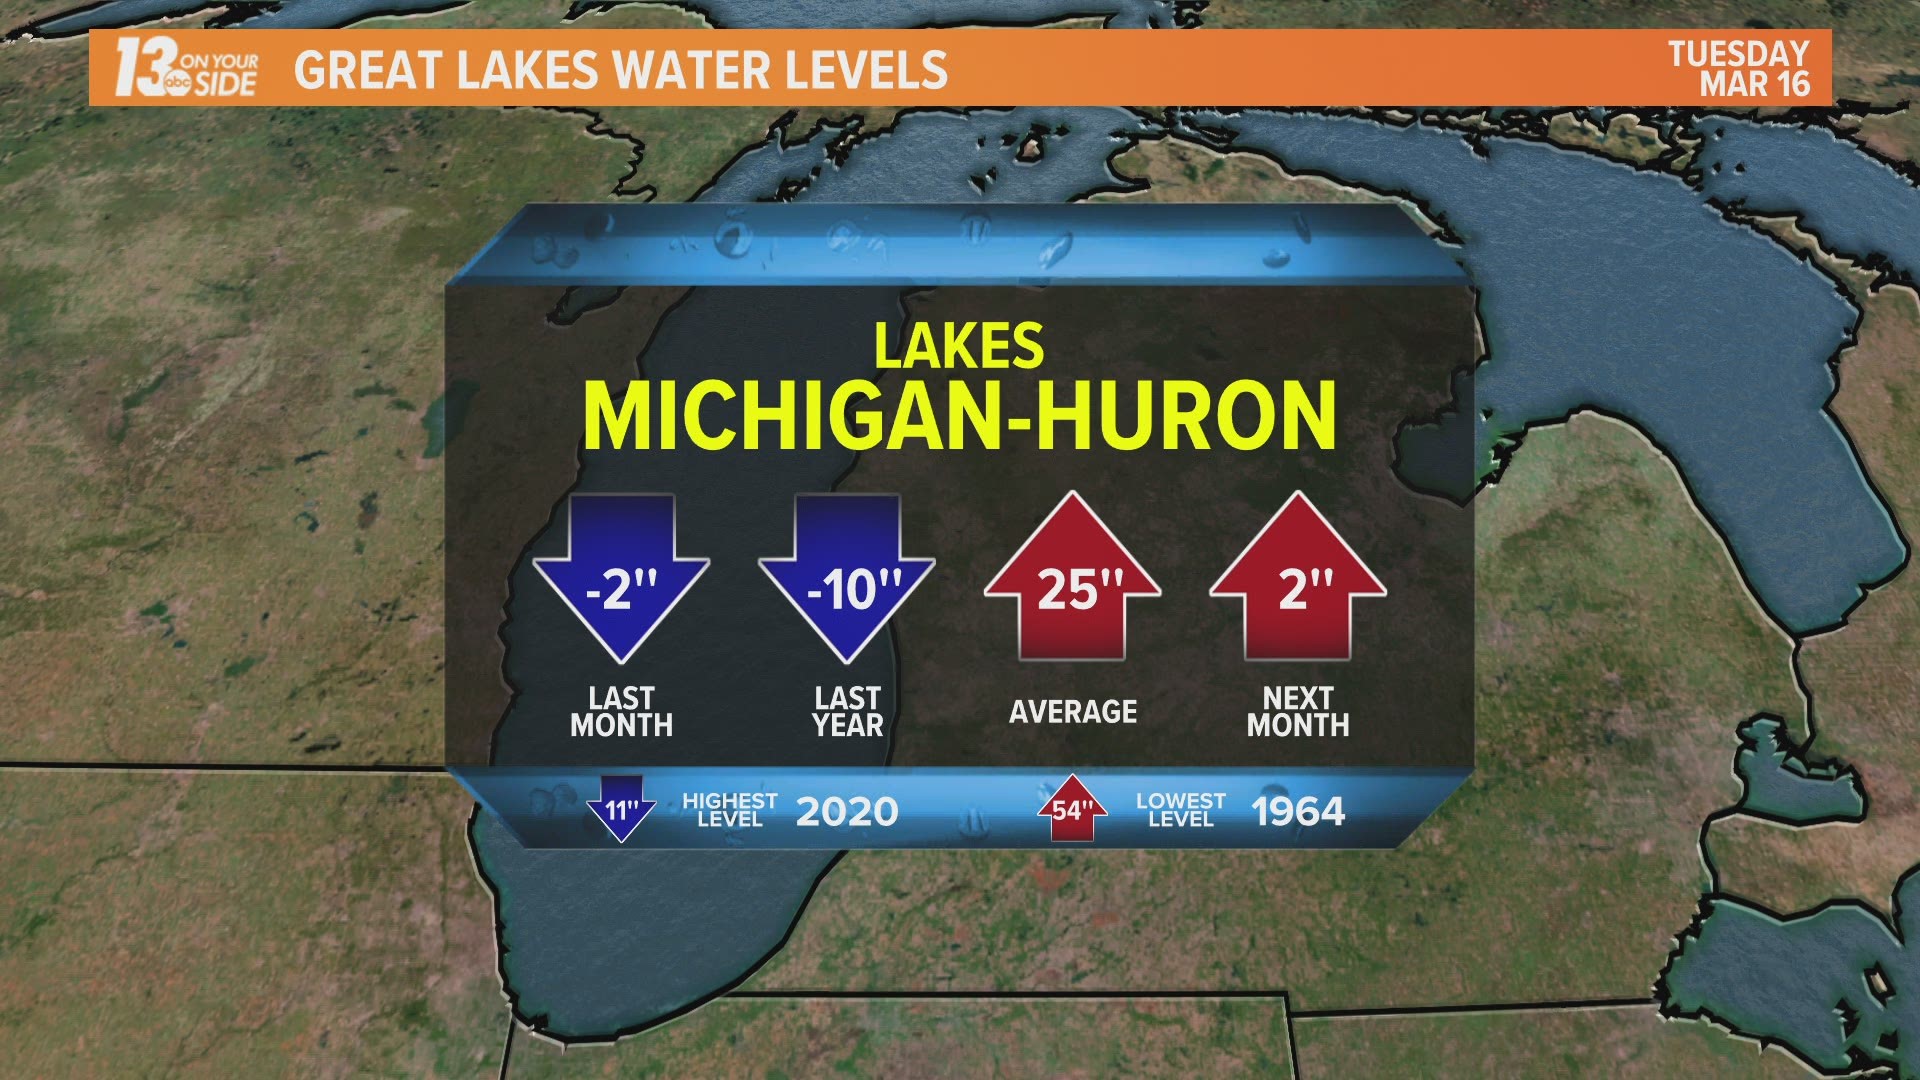 Lake Michigan still remains well above the long-term average levels